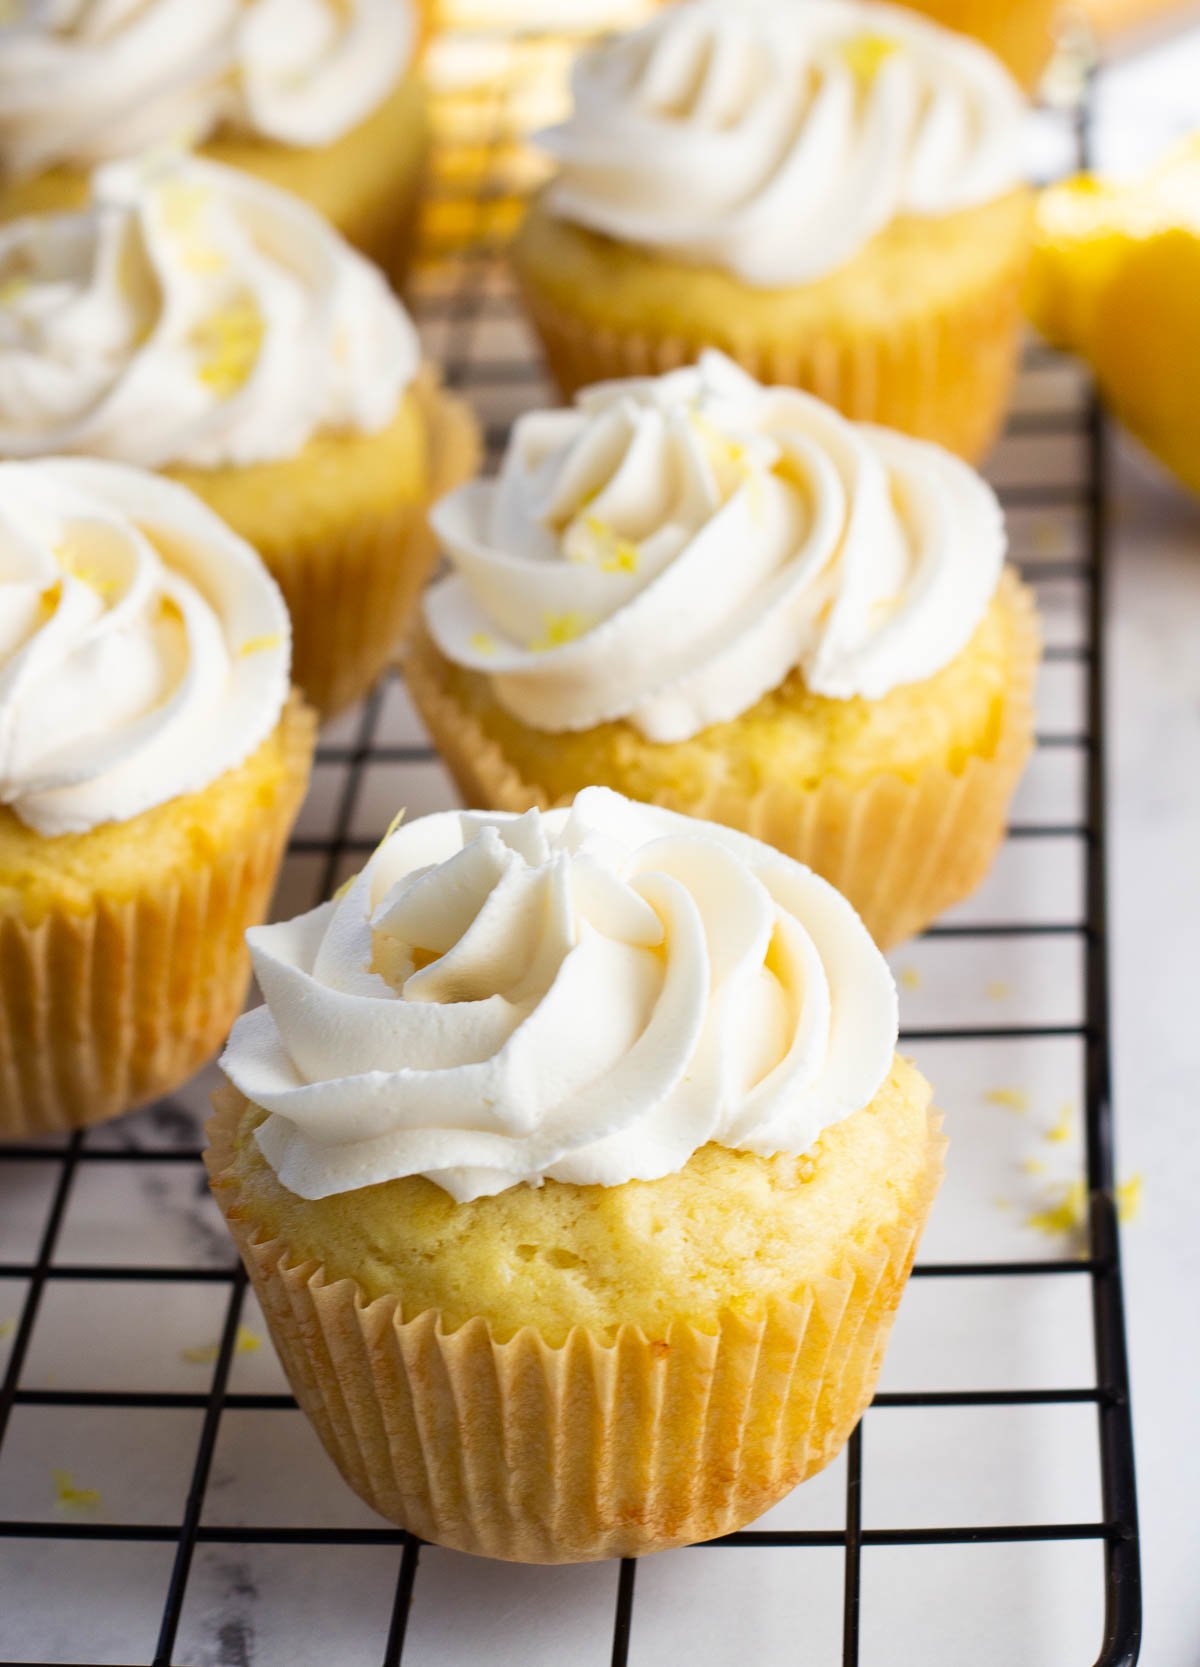 Vegan lemon cupcakes on cooling rack, topped with buttercream frosting and lemon zest.